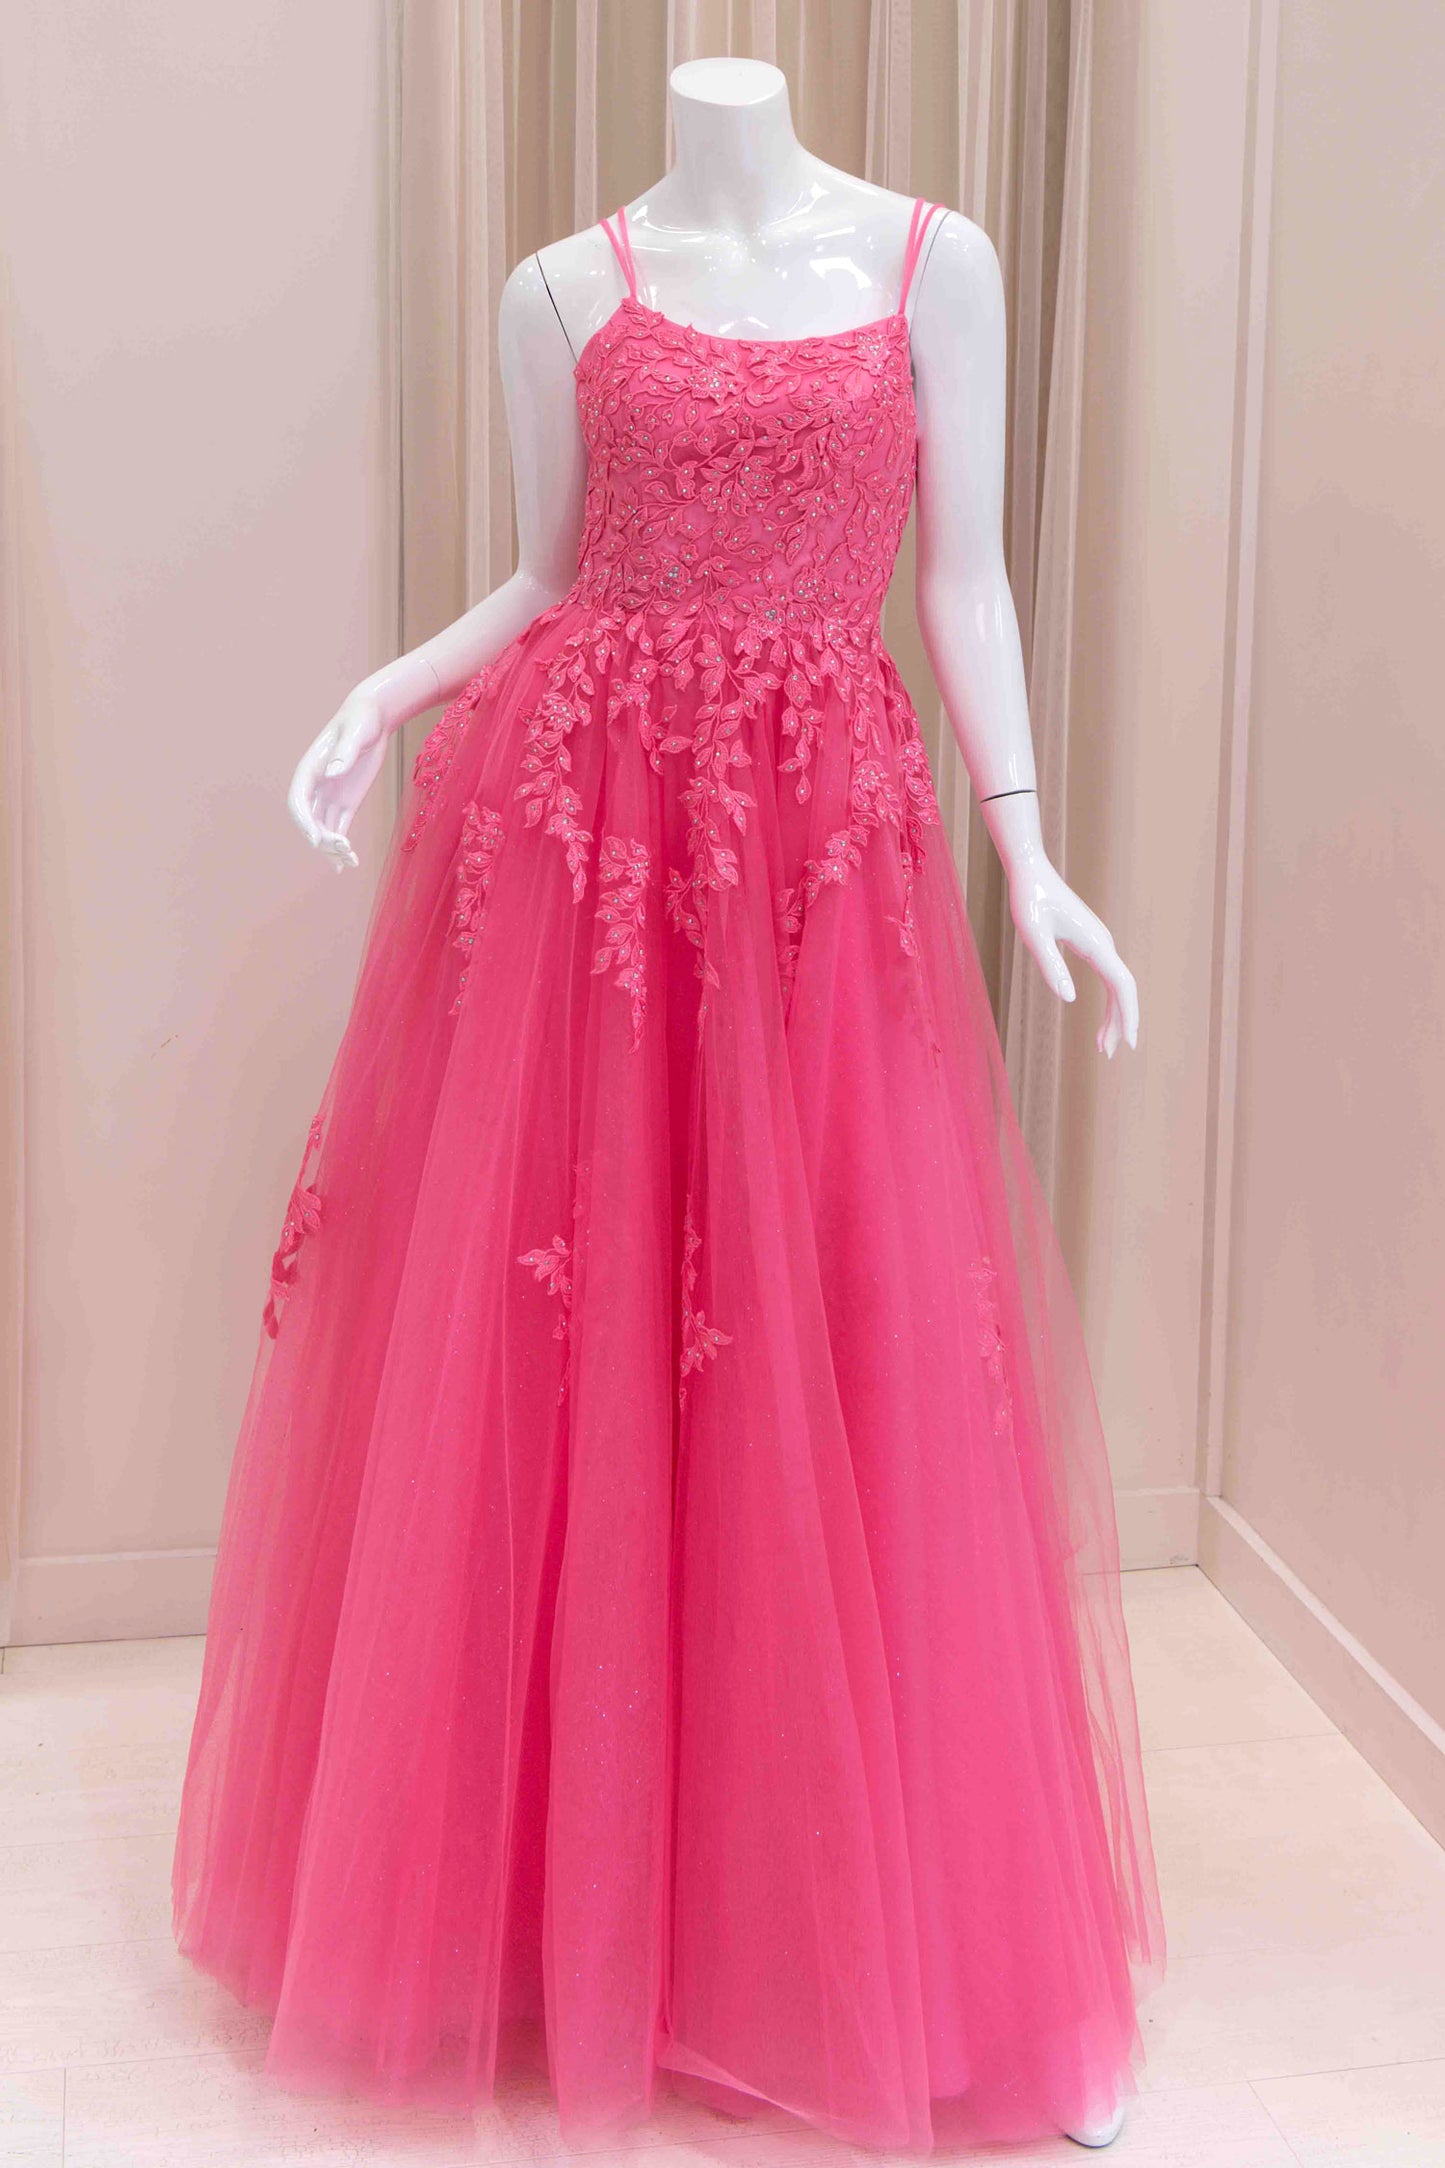 Isolda 3D Applique Ball Gown in Pink